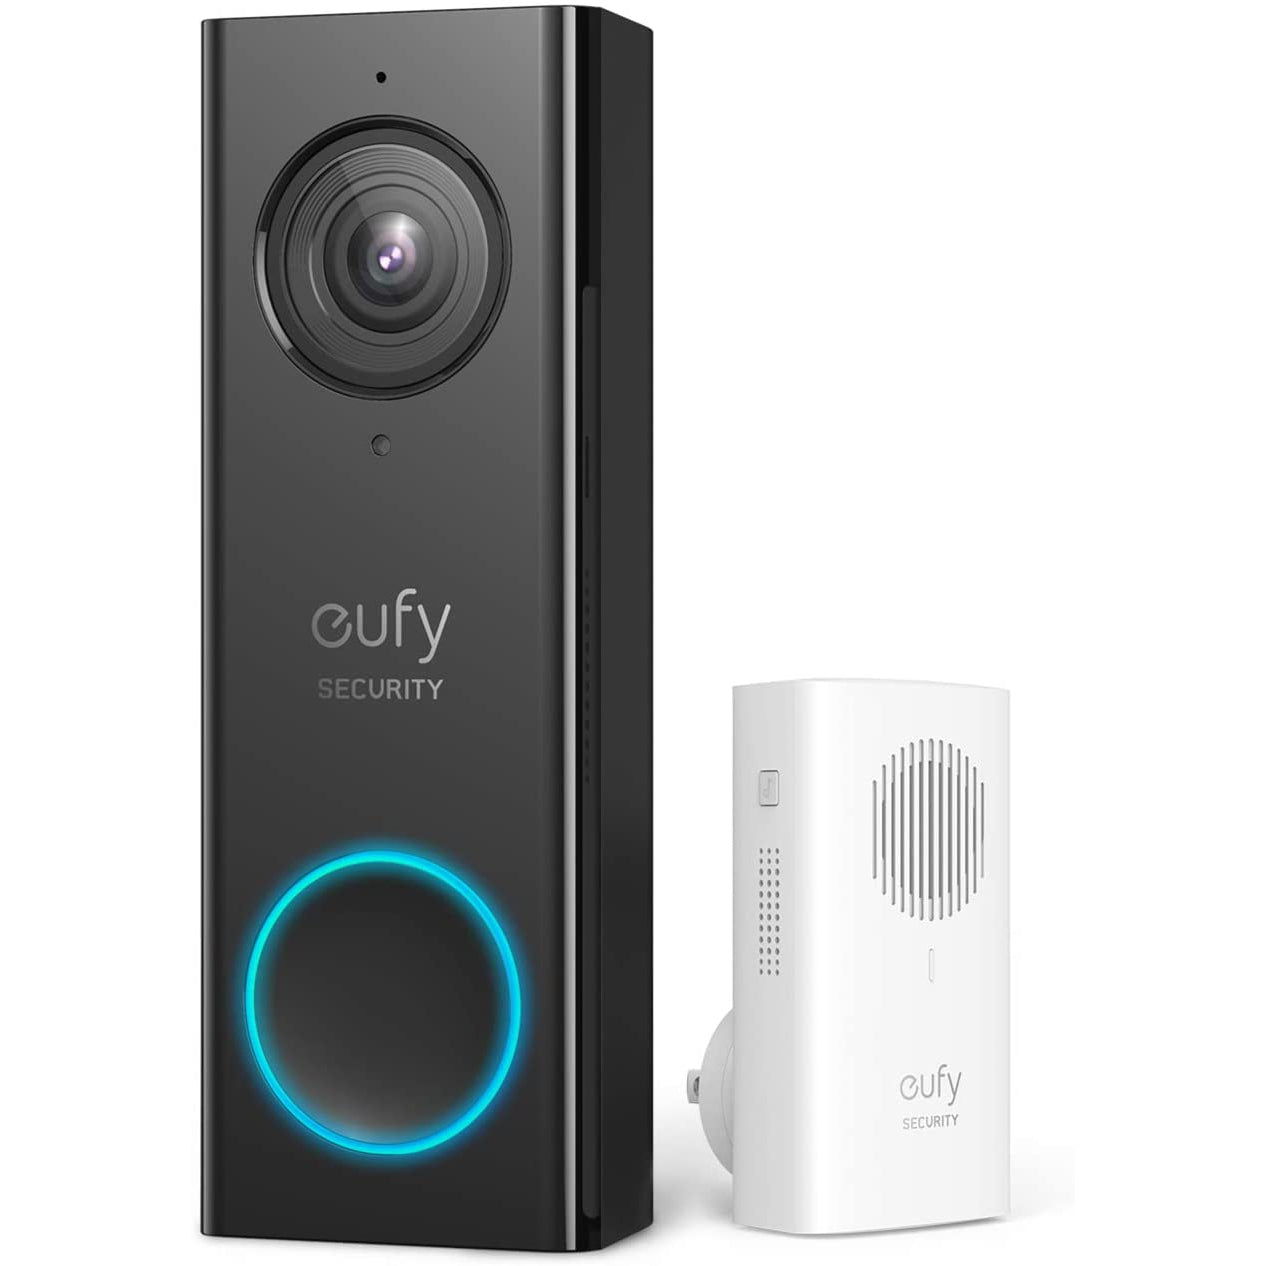 Eufy Security Wi-Fi Video Doorbell, 2K Resolution, Real-Time Response, Secure Local Storage, Free Wireless Chime, Wired